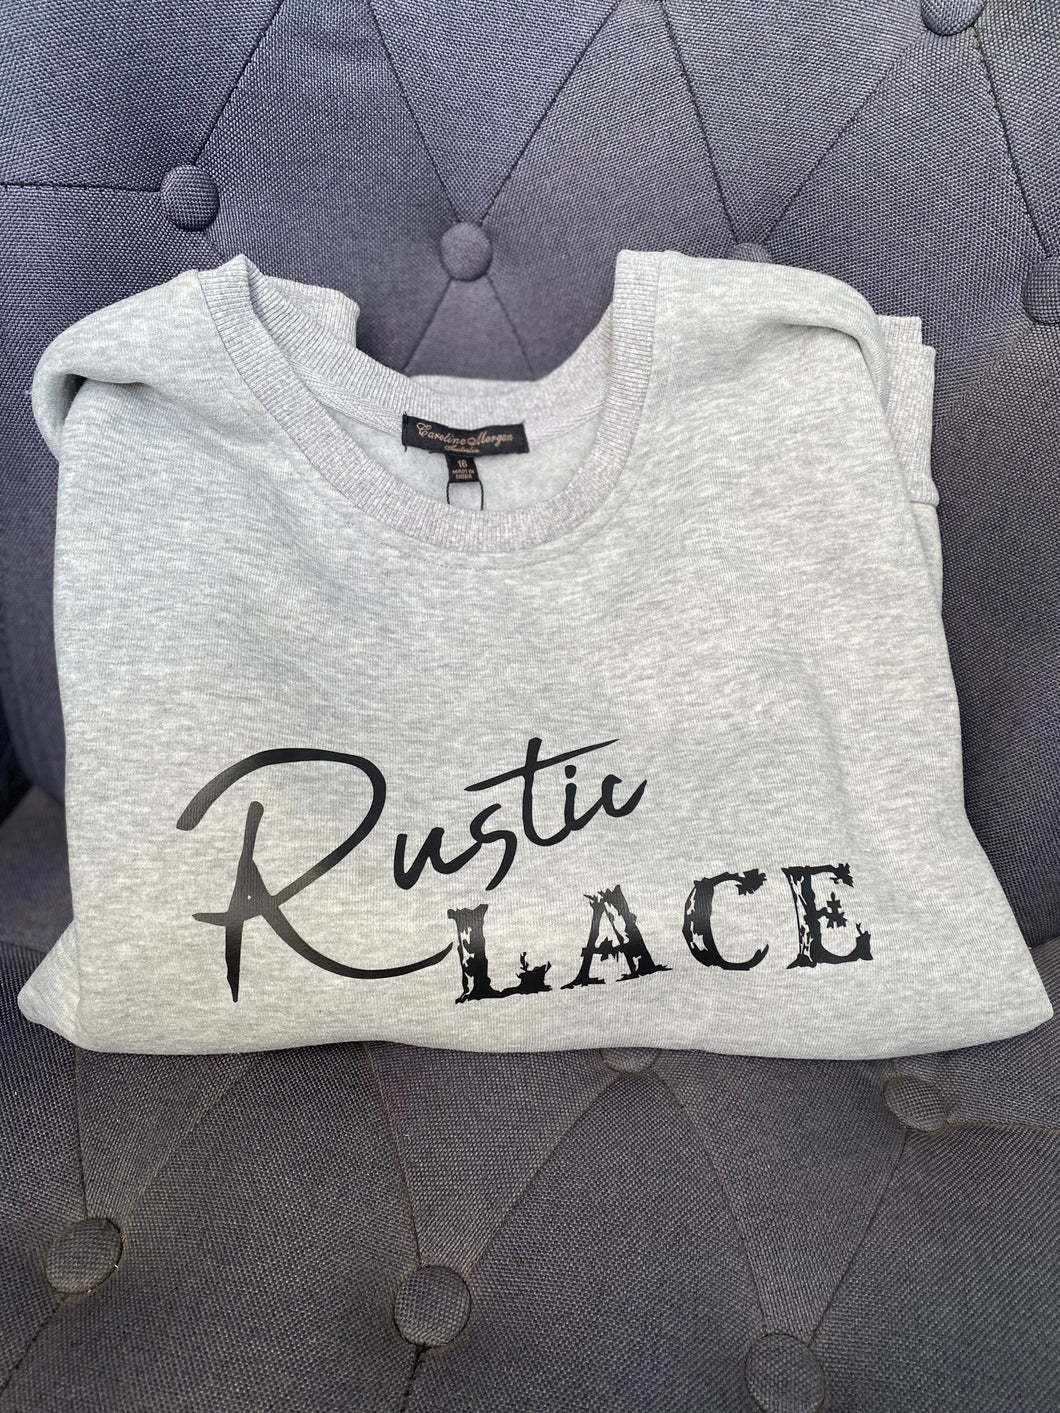 Grey rustic lace crew neck sweater